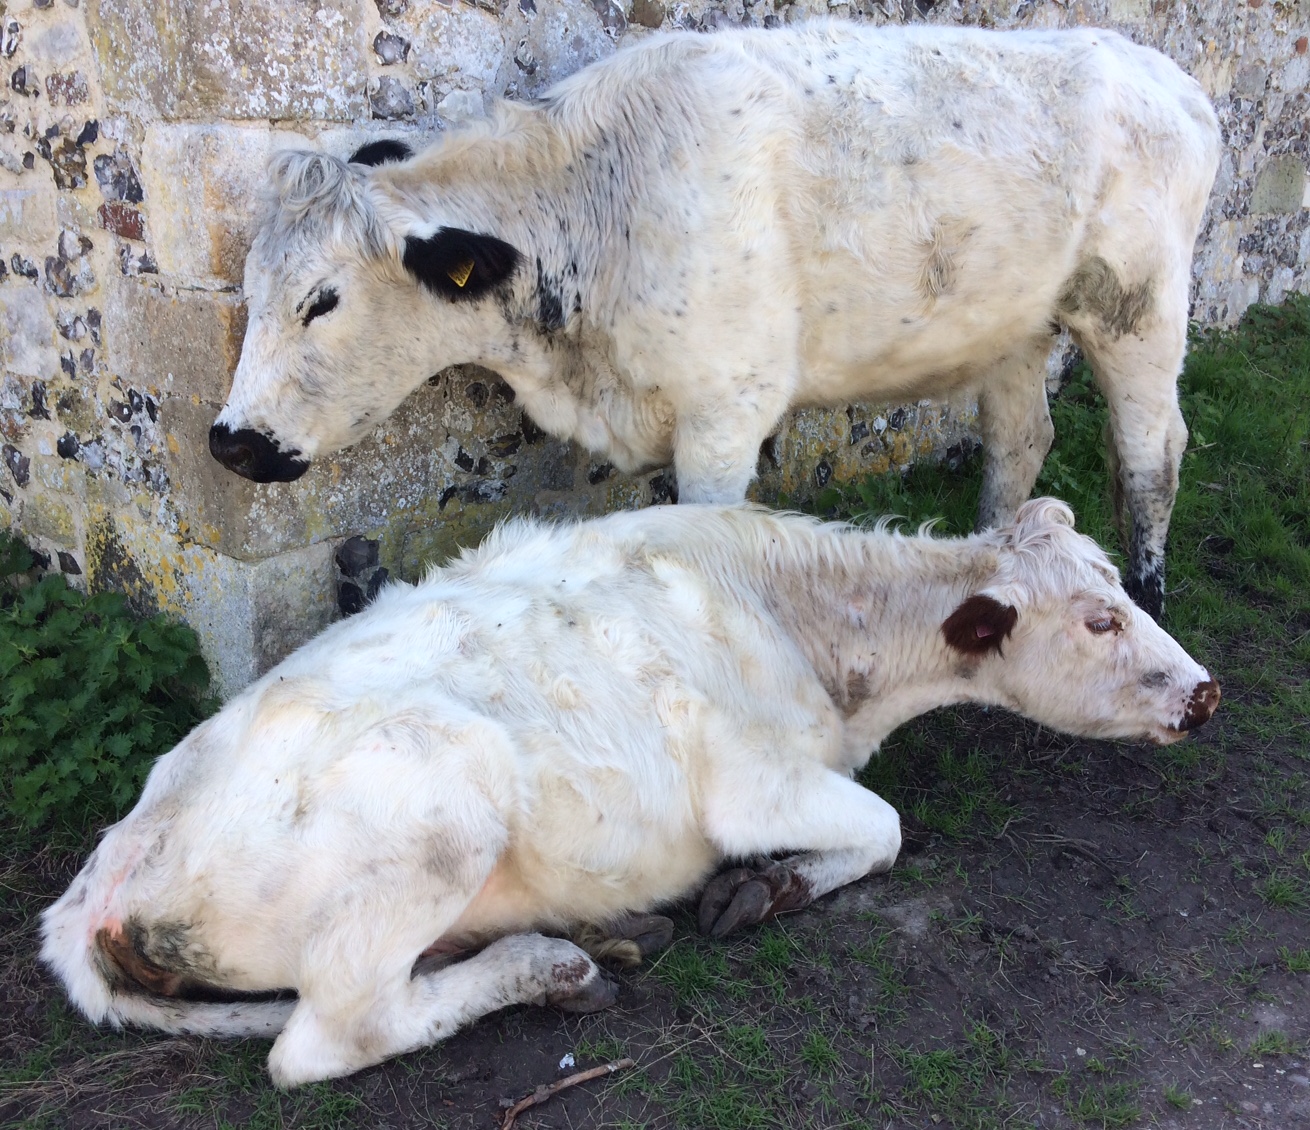 Two white cows